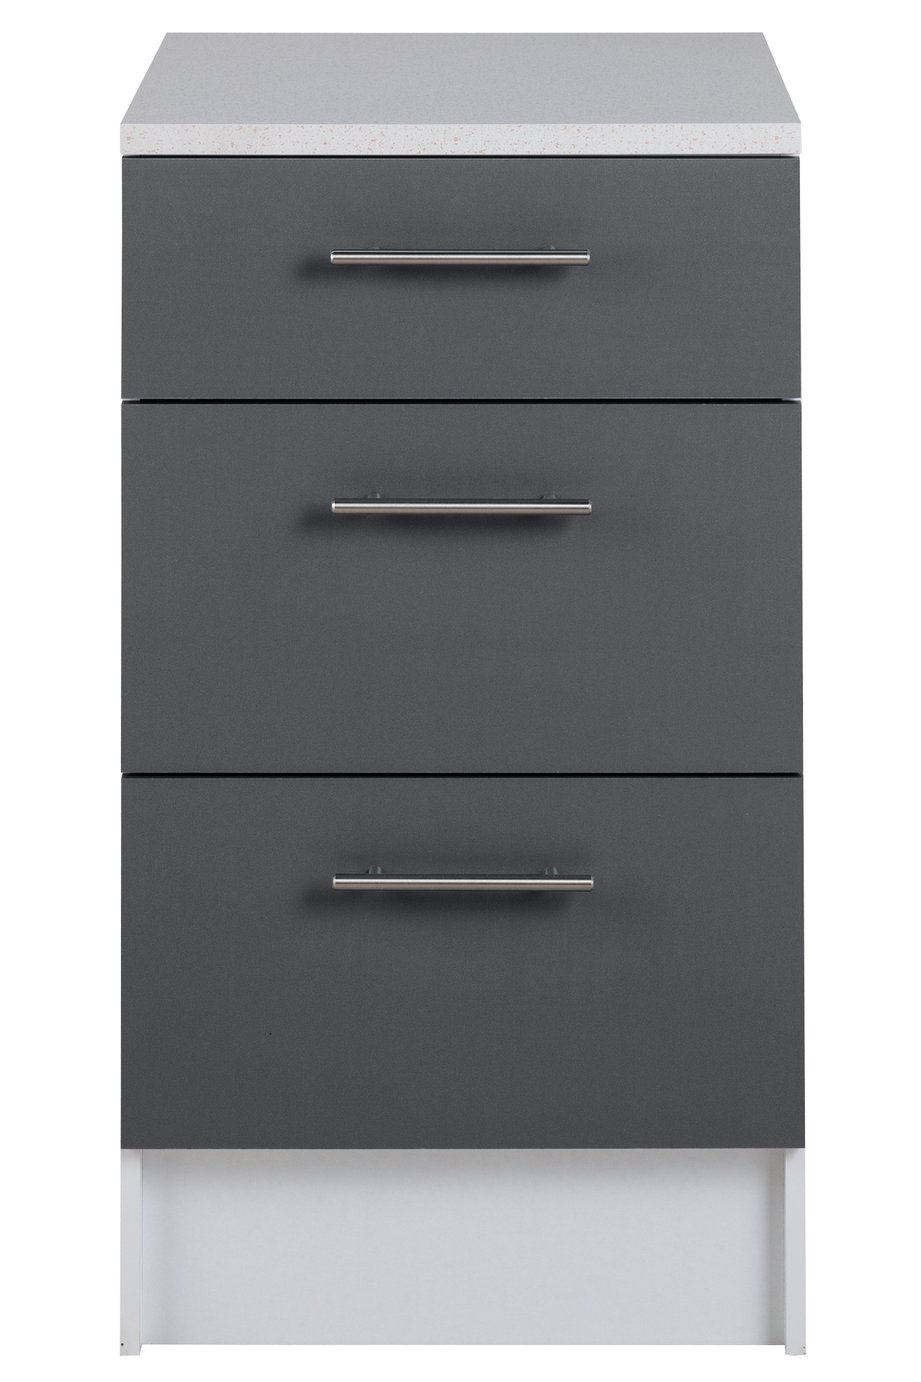 Argos Home Athina 3 Piece Fitted Kitchen Package - Grey